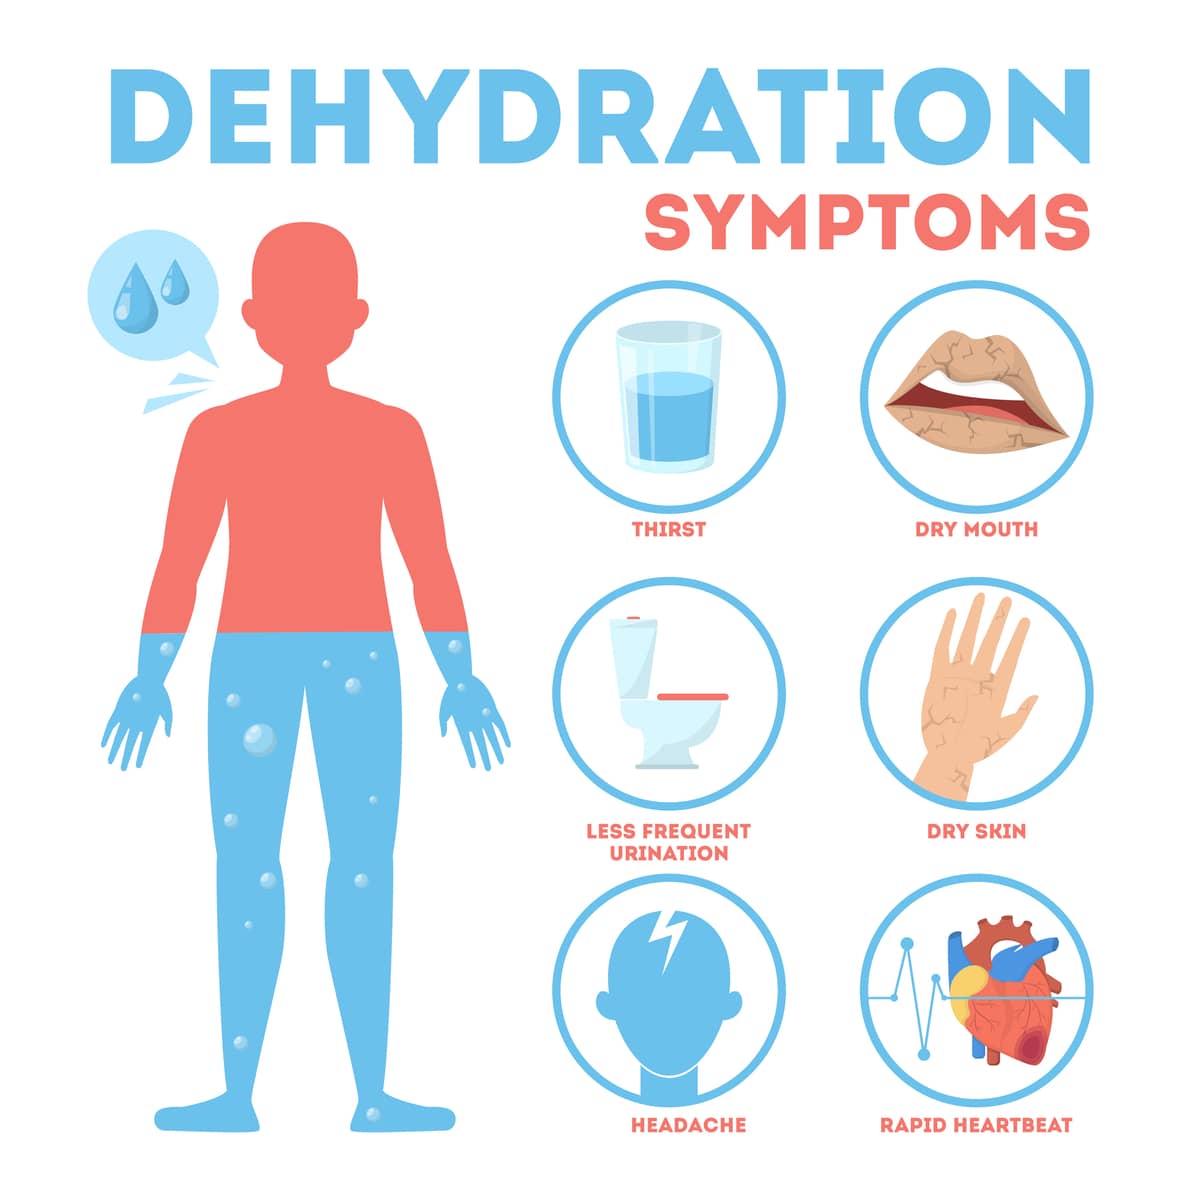 An infographic that list signs of dehydration as "thirst, dry mouth, less frequent urination, dry skin, headache, and rapid heartbeat"